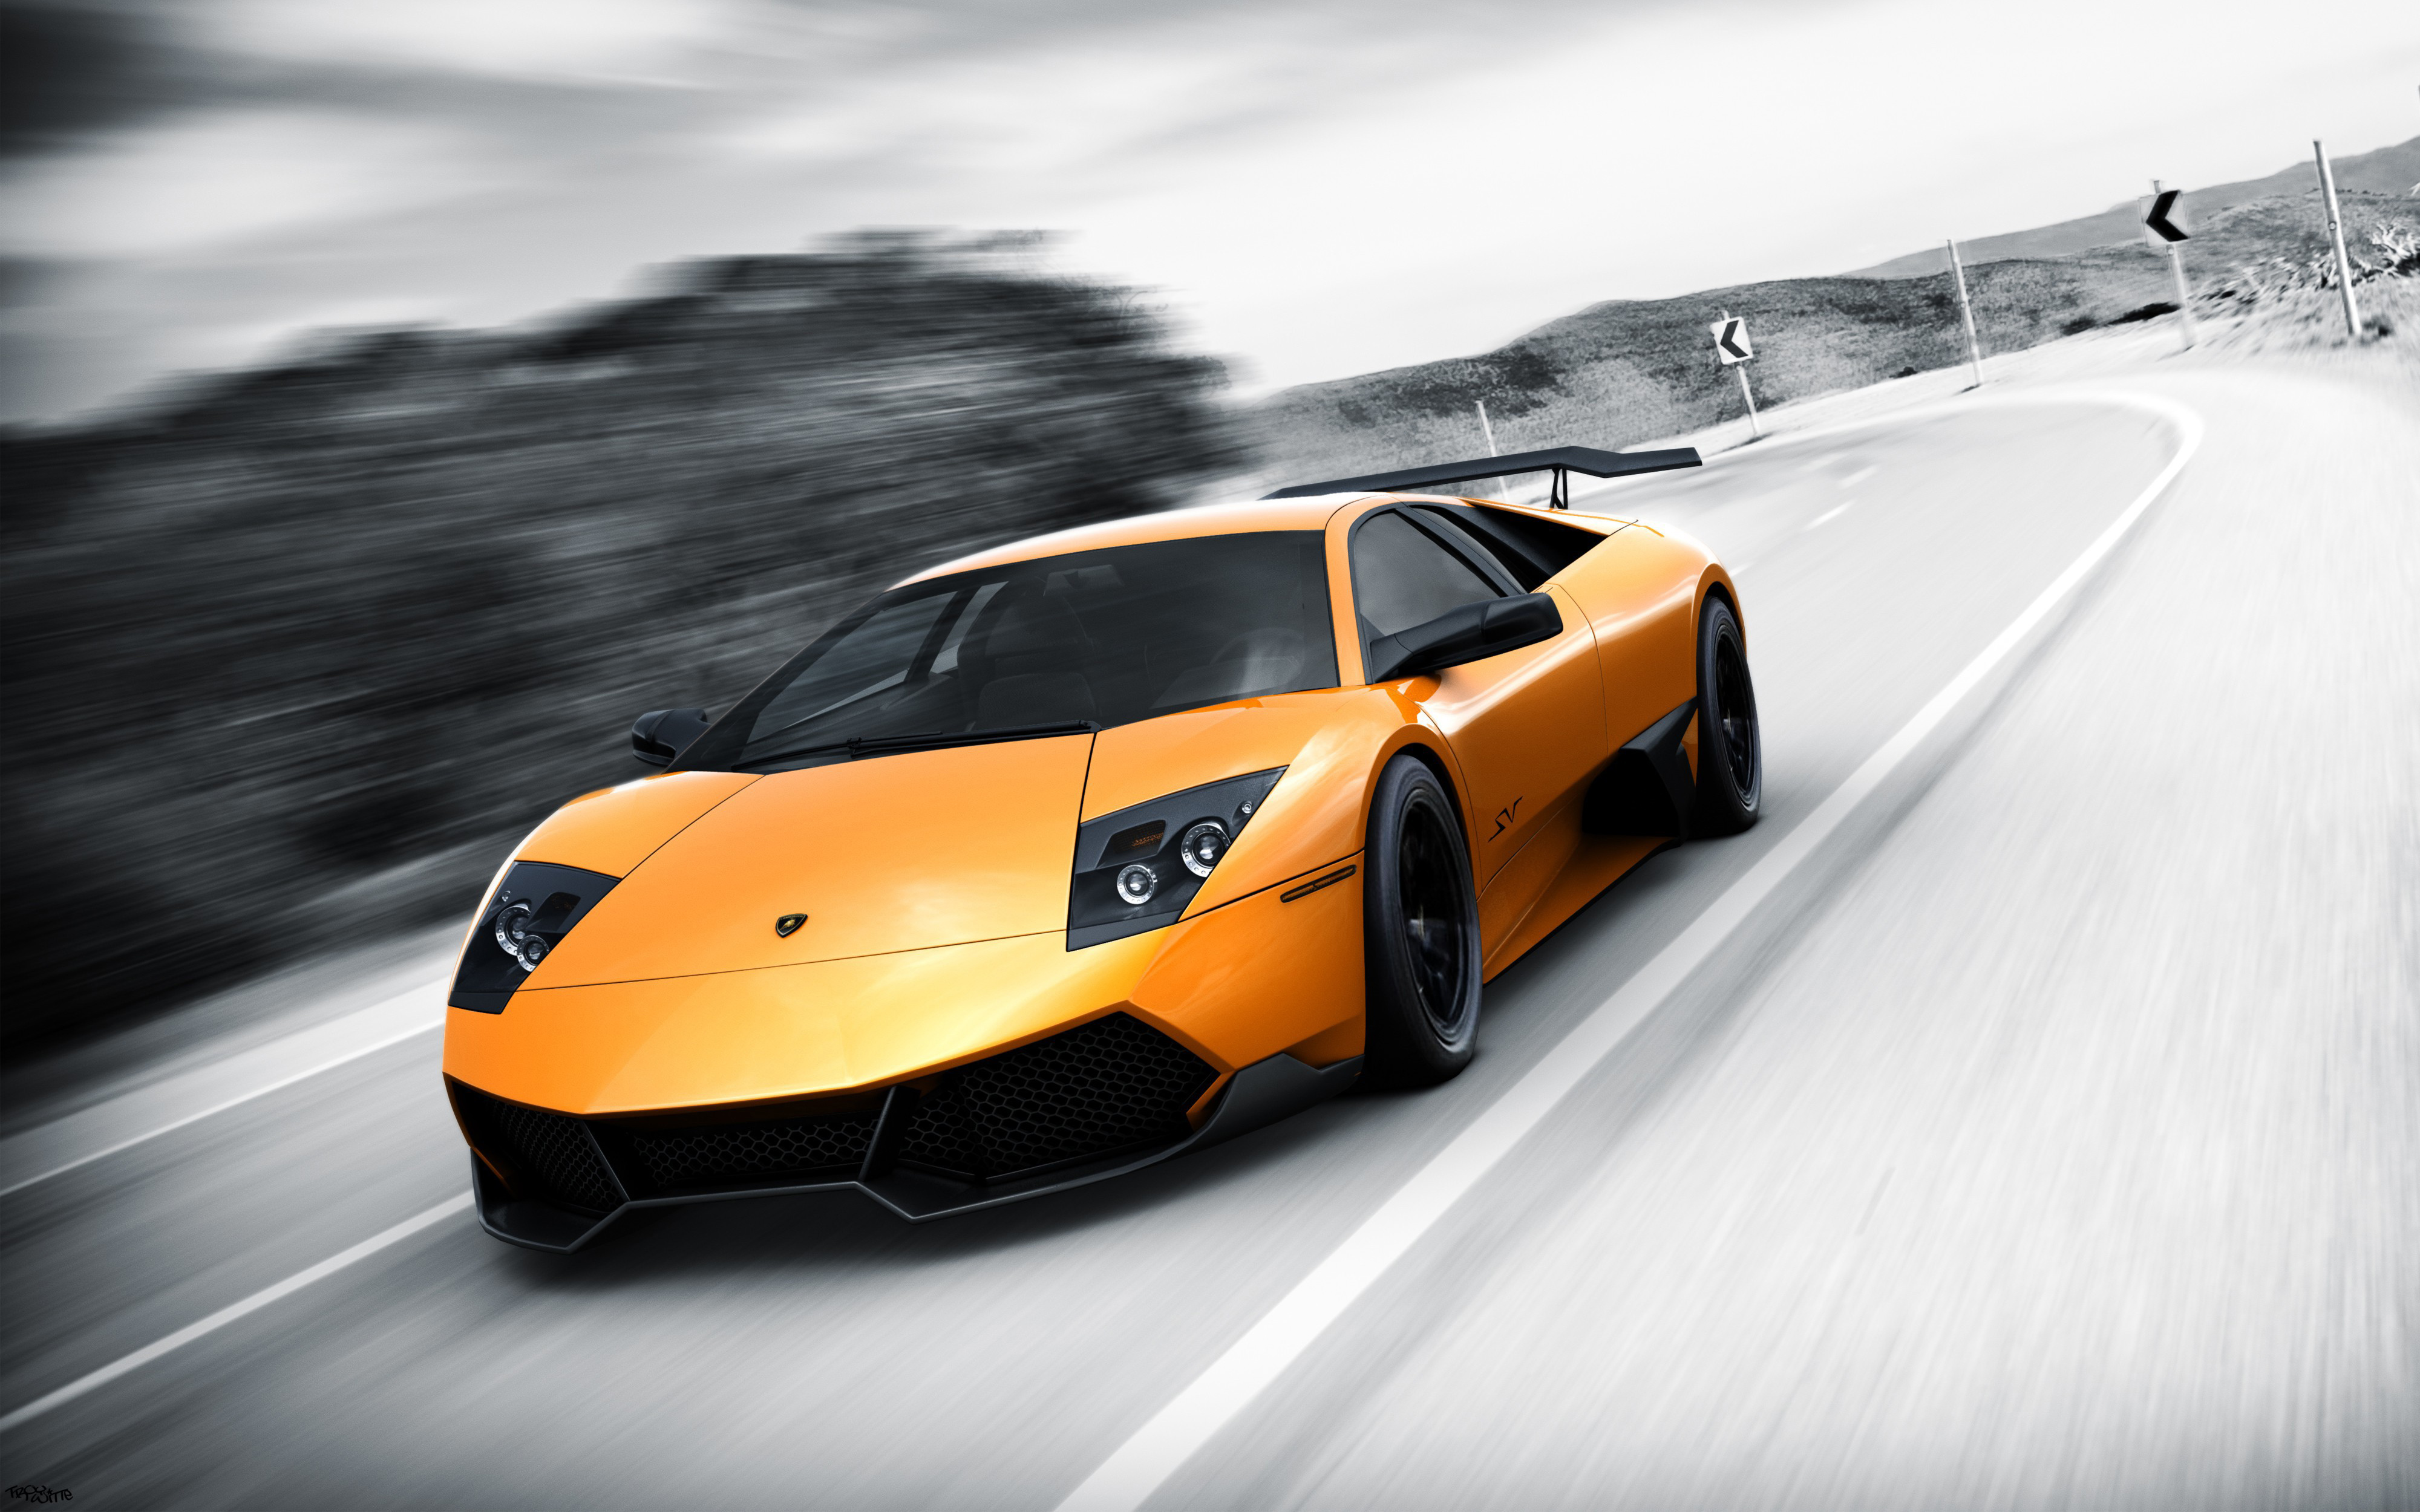 43 Live Car Wallpaper for PC